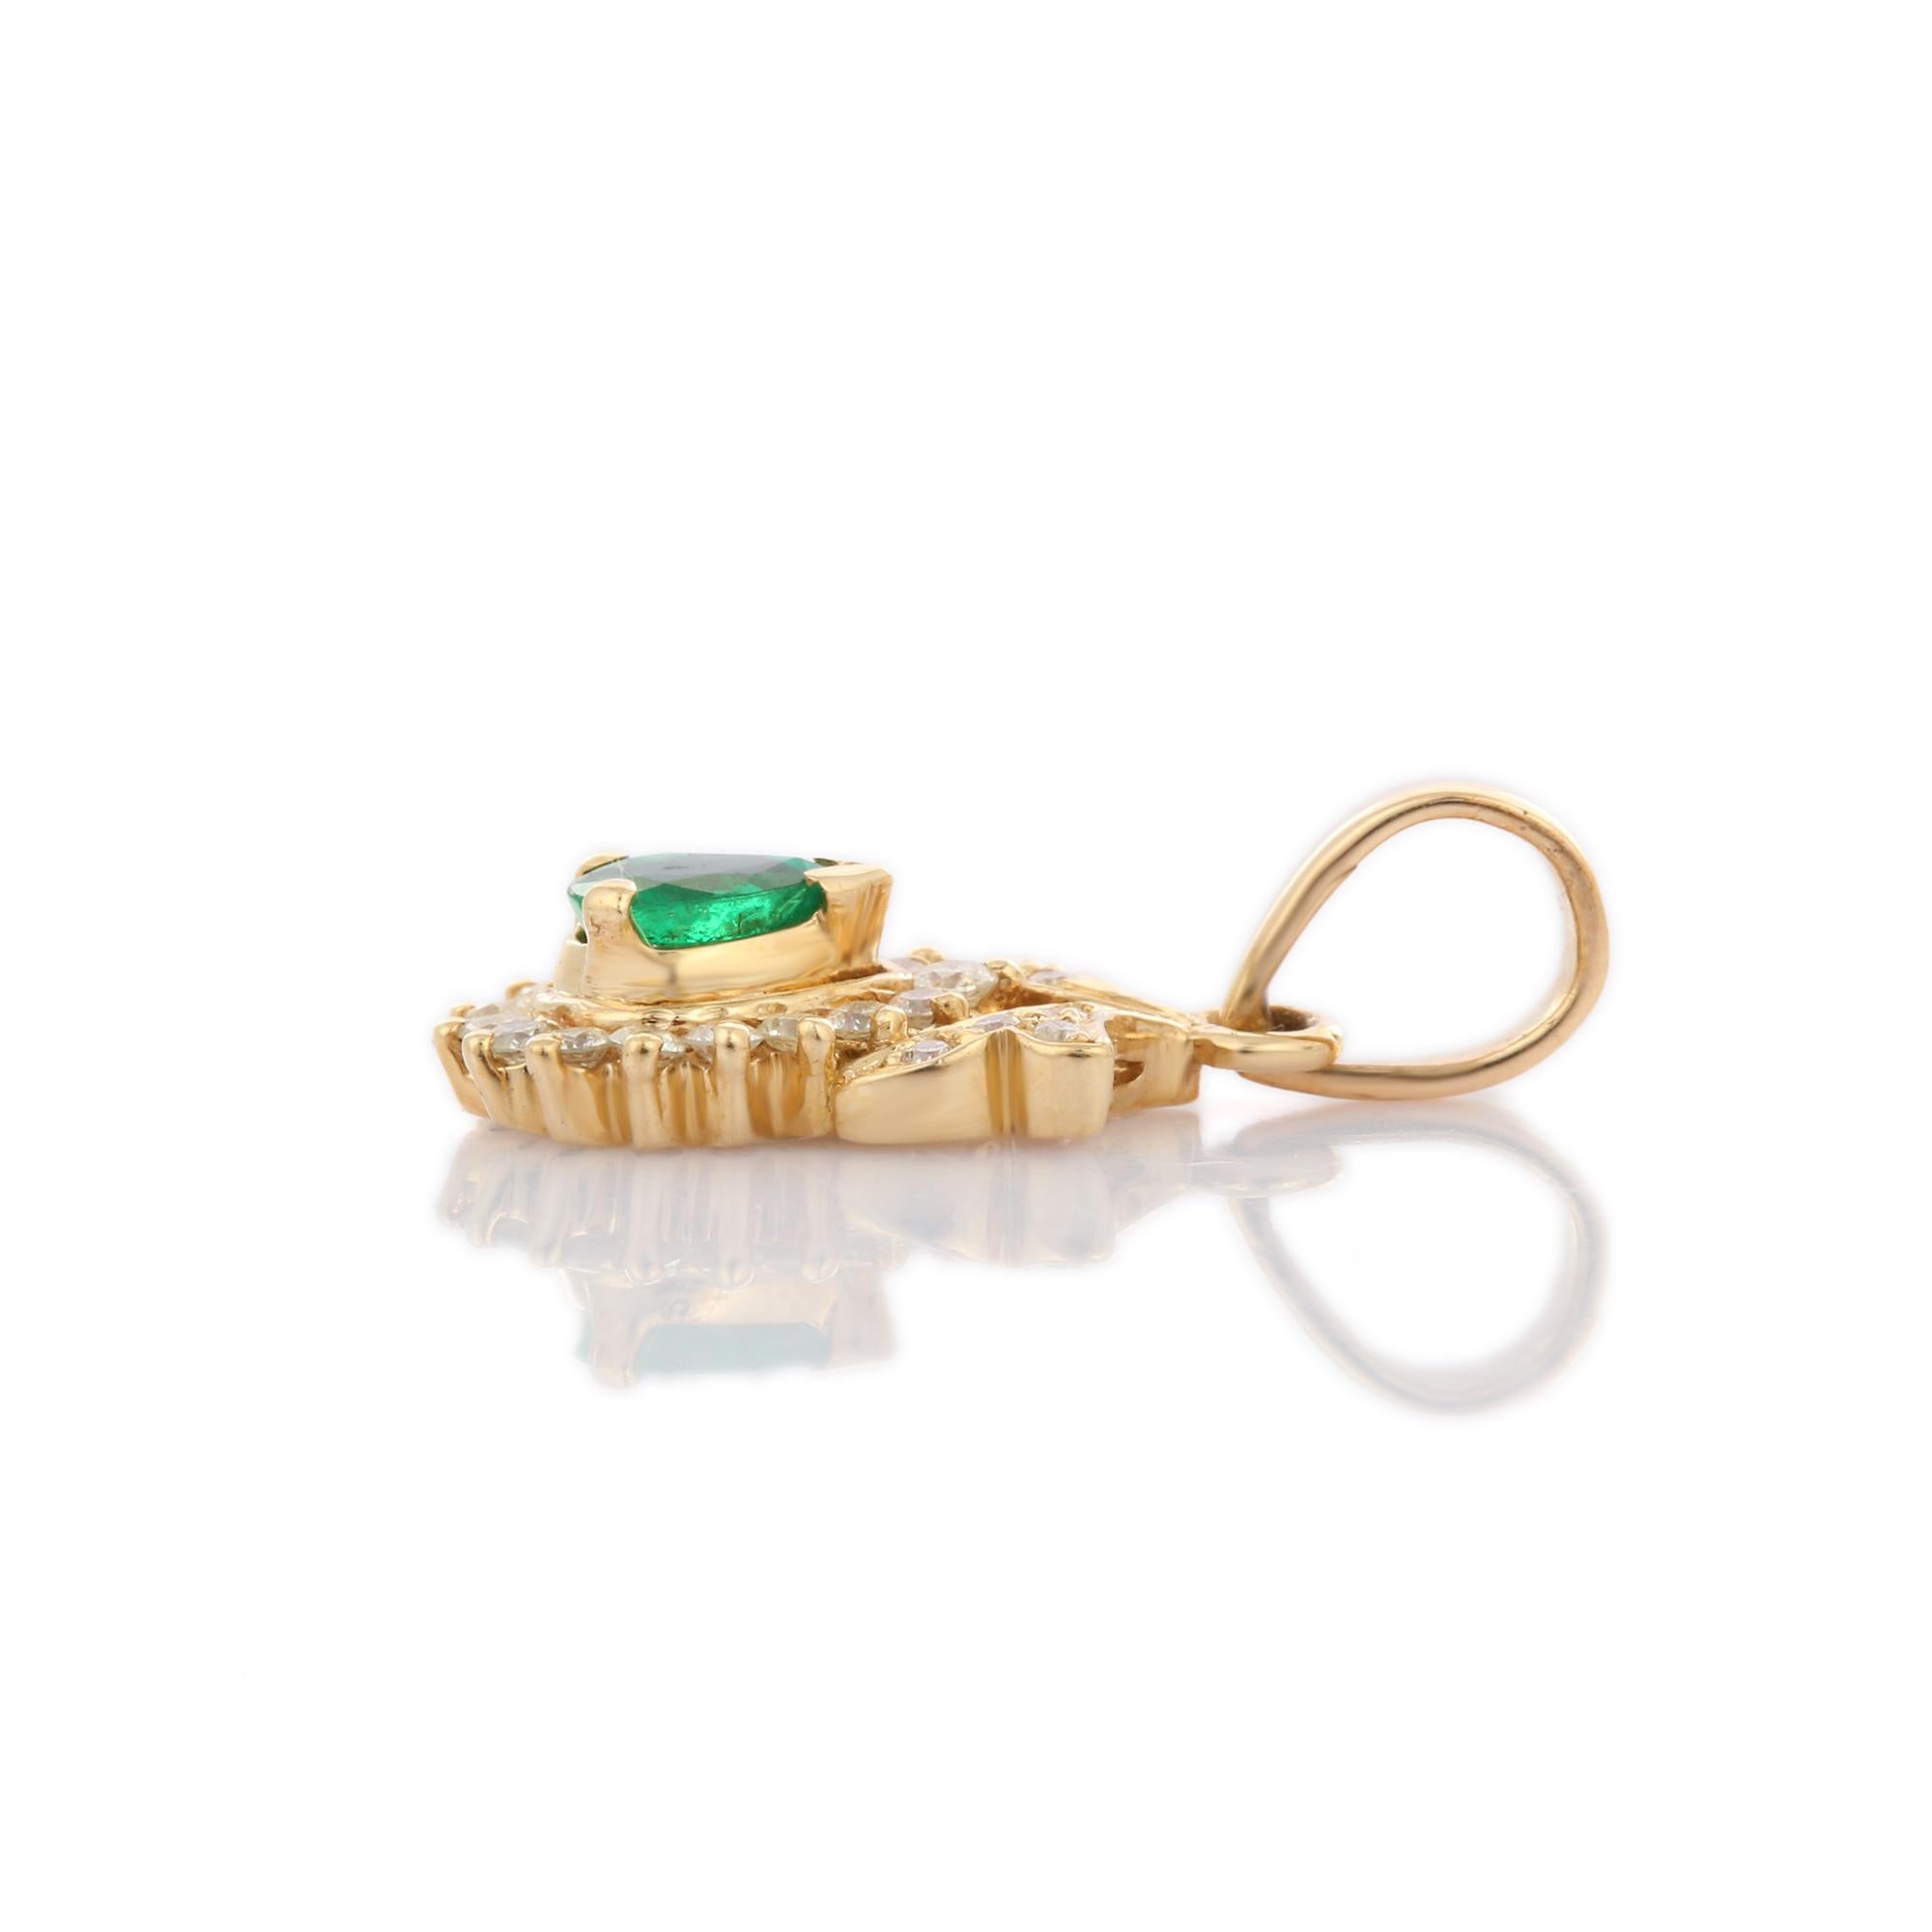 Pear Cut Emerald Diamond Pendant studded with emerald and diamond in 14K Gold. This stunning piece of jewelry instantly elevates a casual look or dressy outfit. 
Emerald enhances the intellectual capacity. 
Designed with pear cut emerald set with